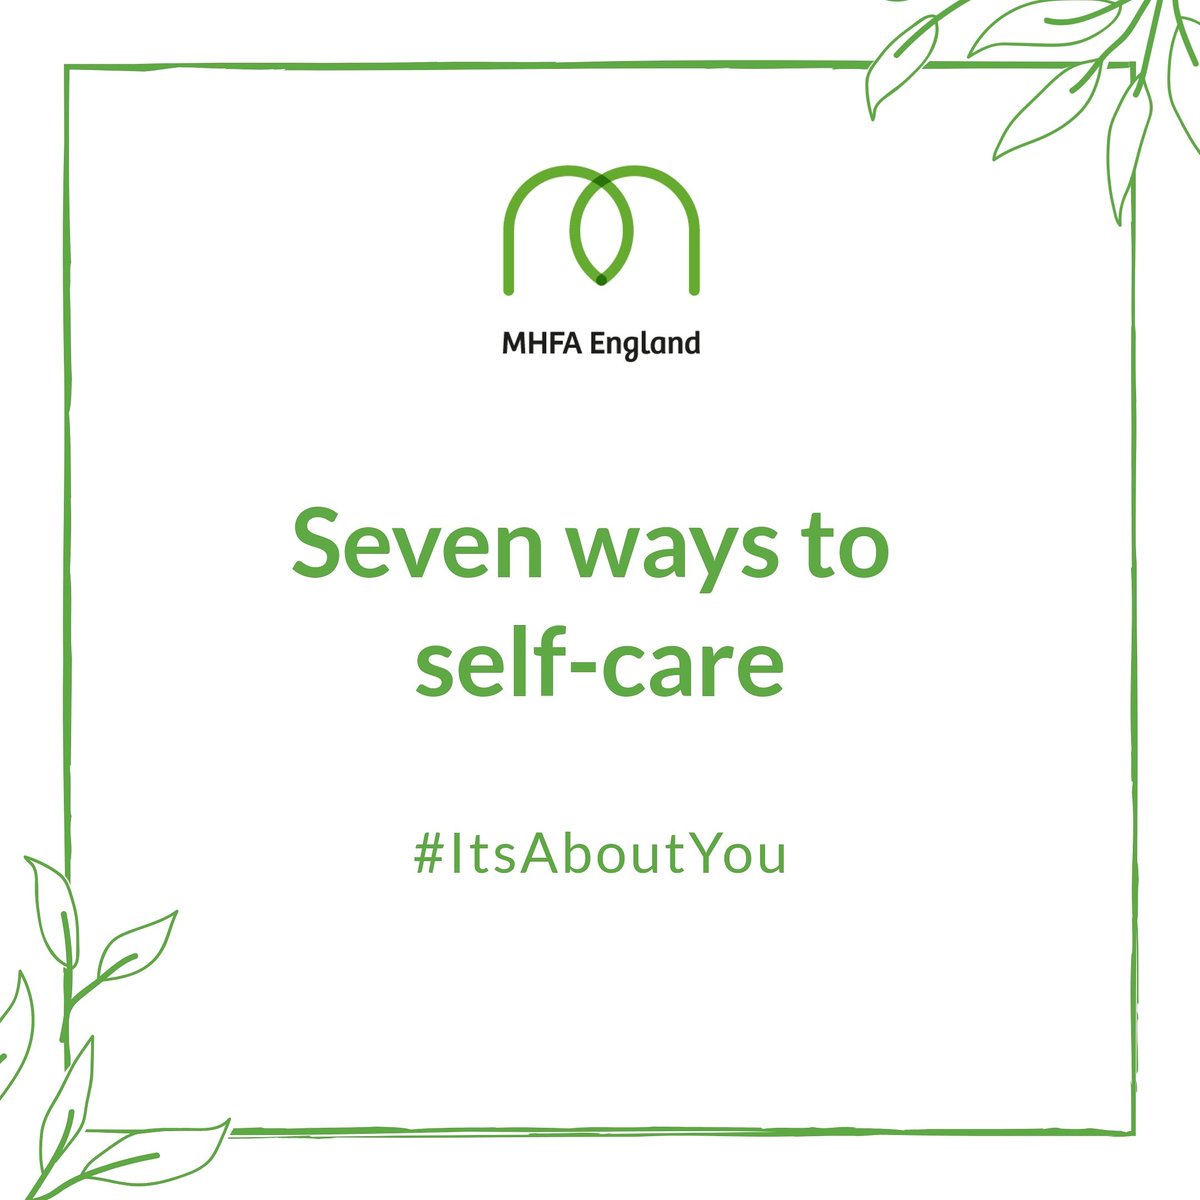 This week, if you can, why not try to have a device and digital detox in the evening. Use the free time to check-in with yourself - how are you feeling?  #ItsAboutYou